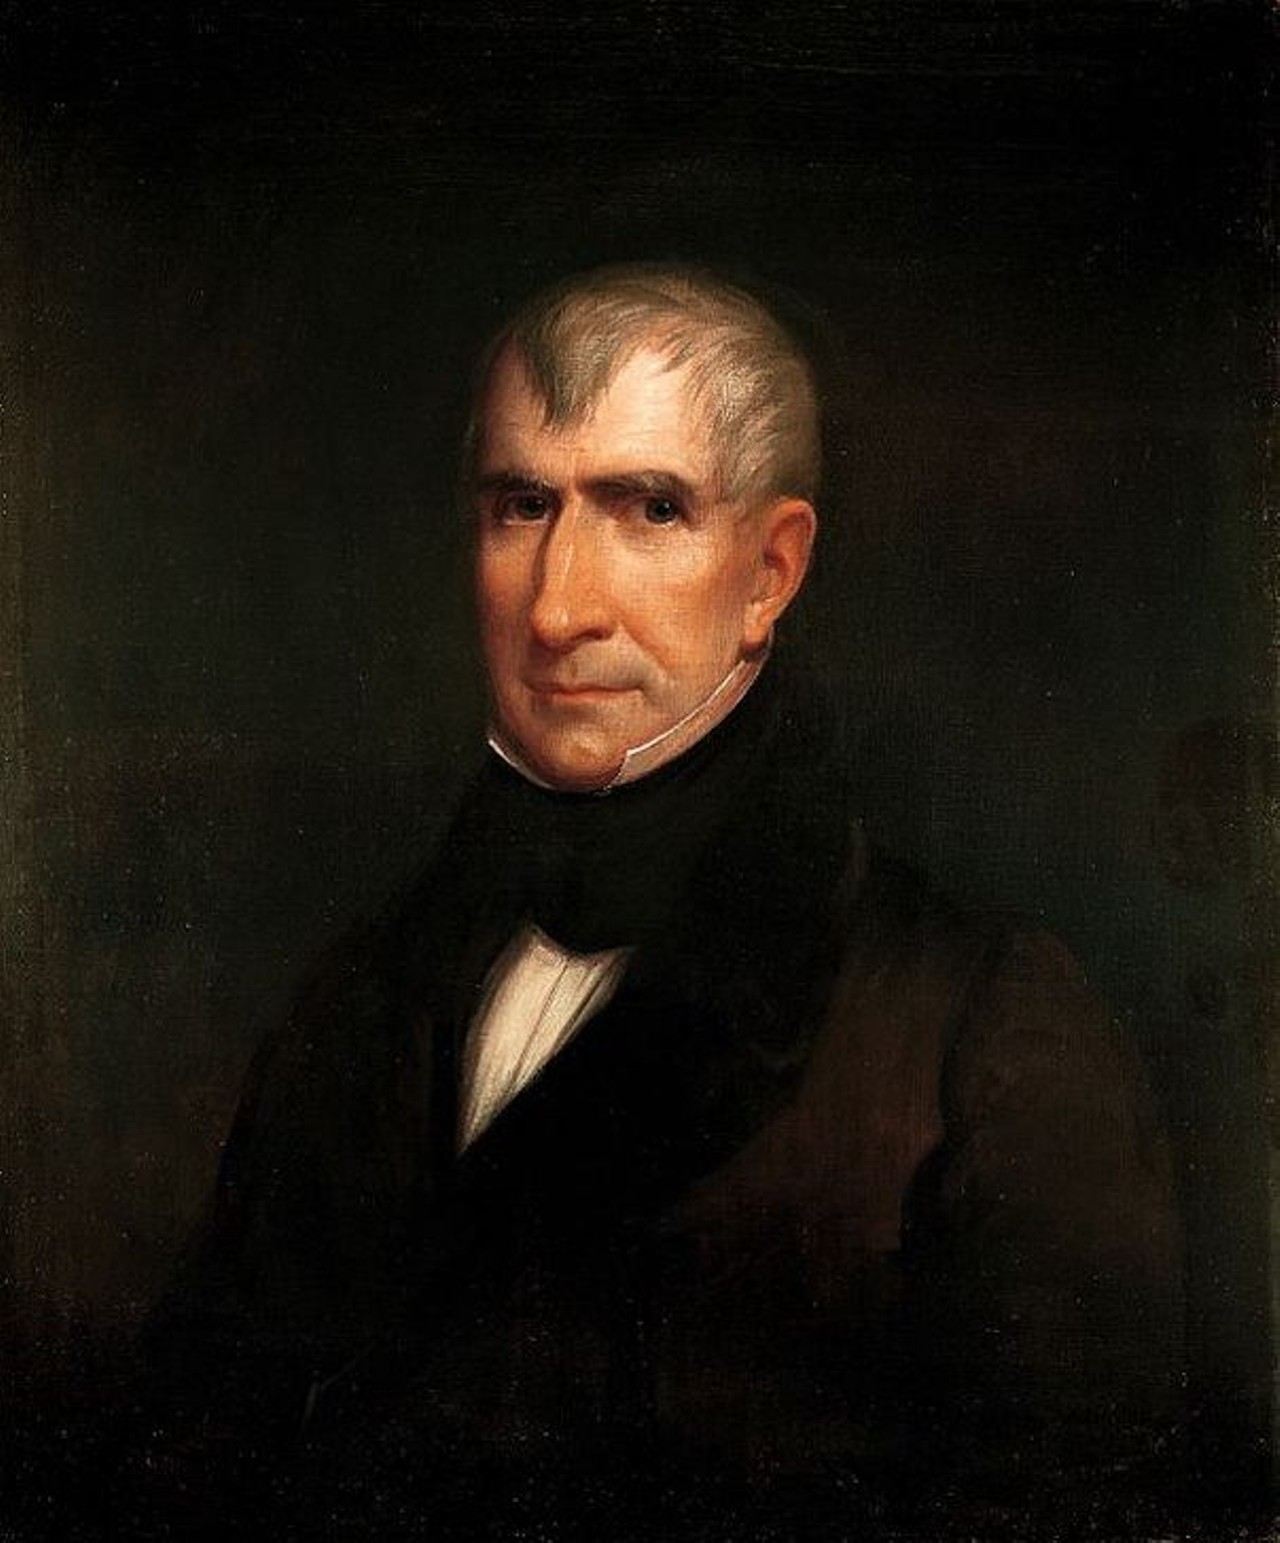 William Henry Harrison
William Henry Harrison Memorial, North Bend
Harrison was the 9th president of the United States and the grandfather of the 23rd. He became the first U.S. president to die in office when he died of typhoid 31 days into his first term.
Photo via Wikimedia Commons